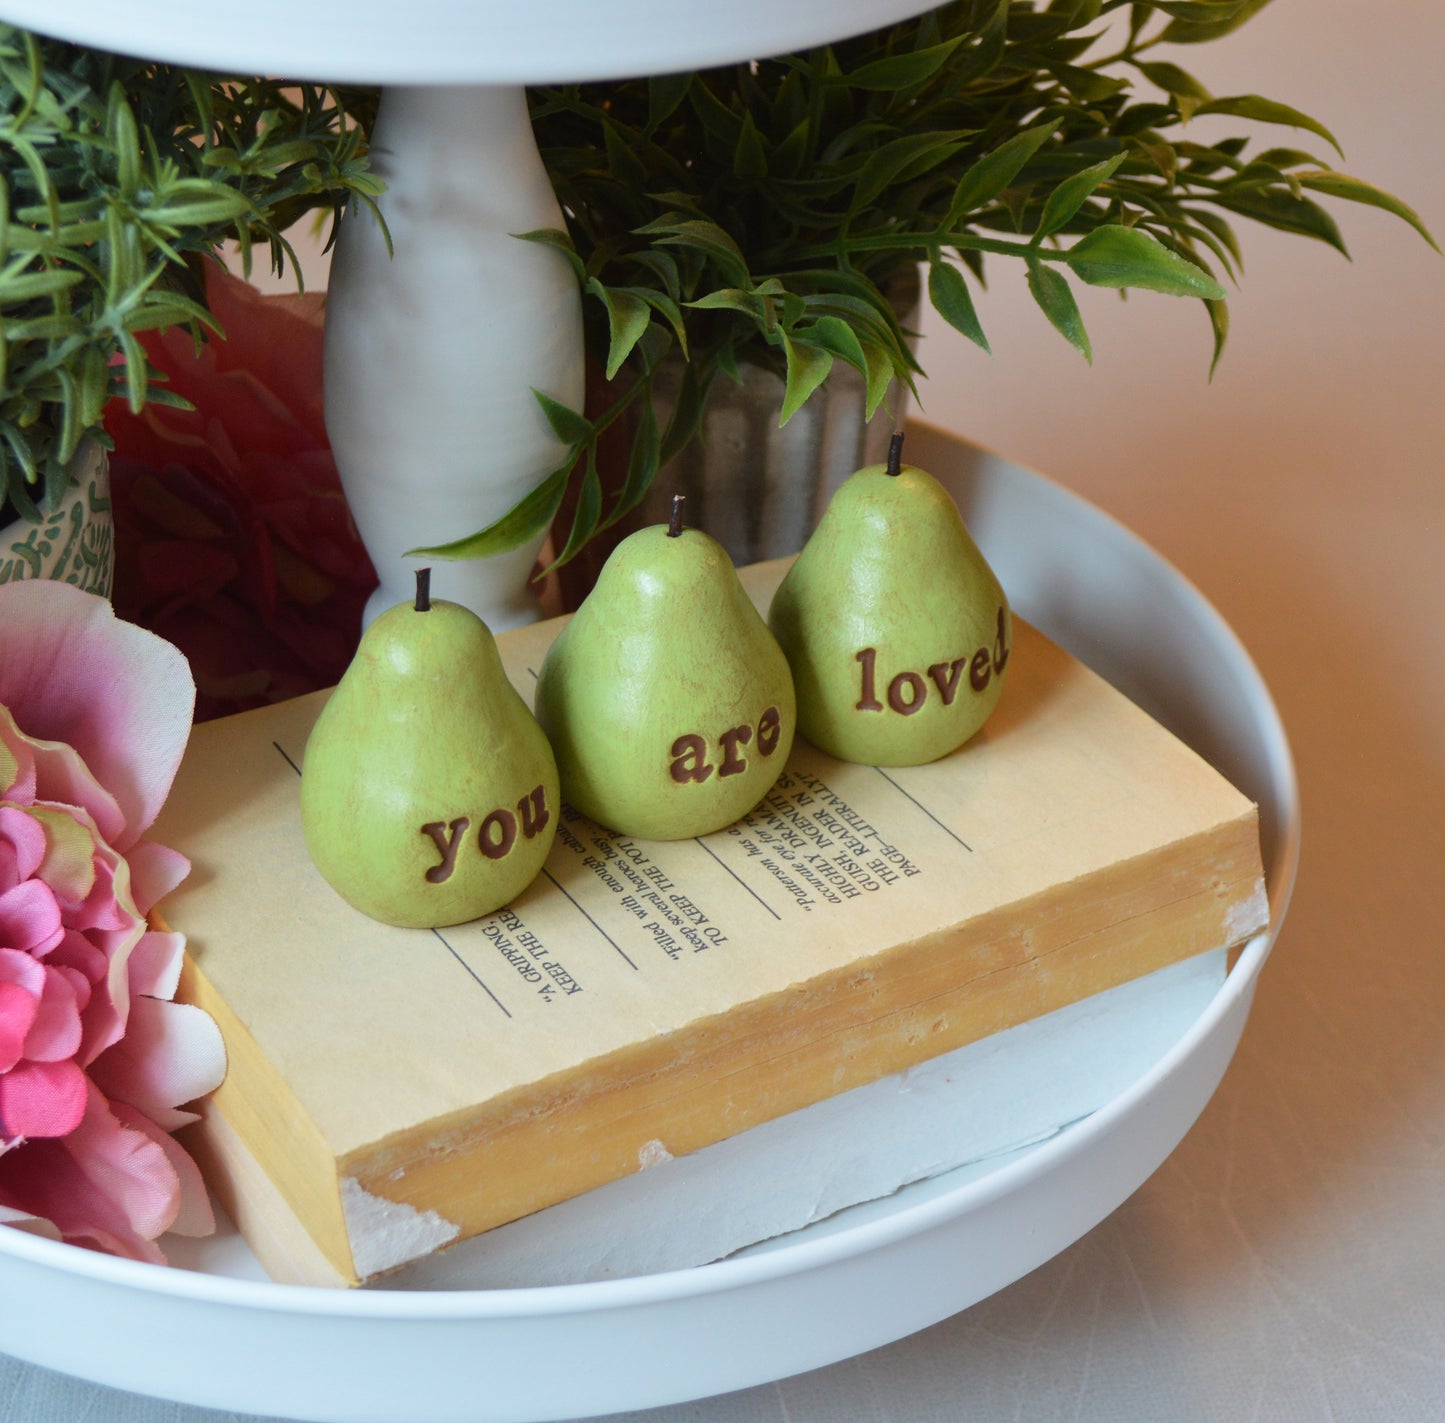 3 rustic green you are loved pears / FREE SHIPPING